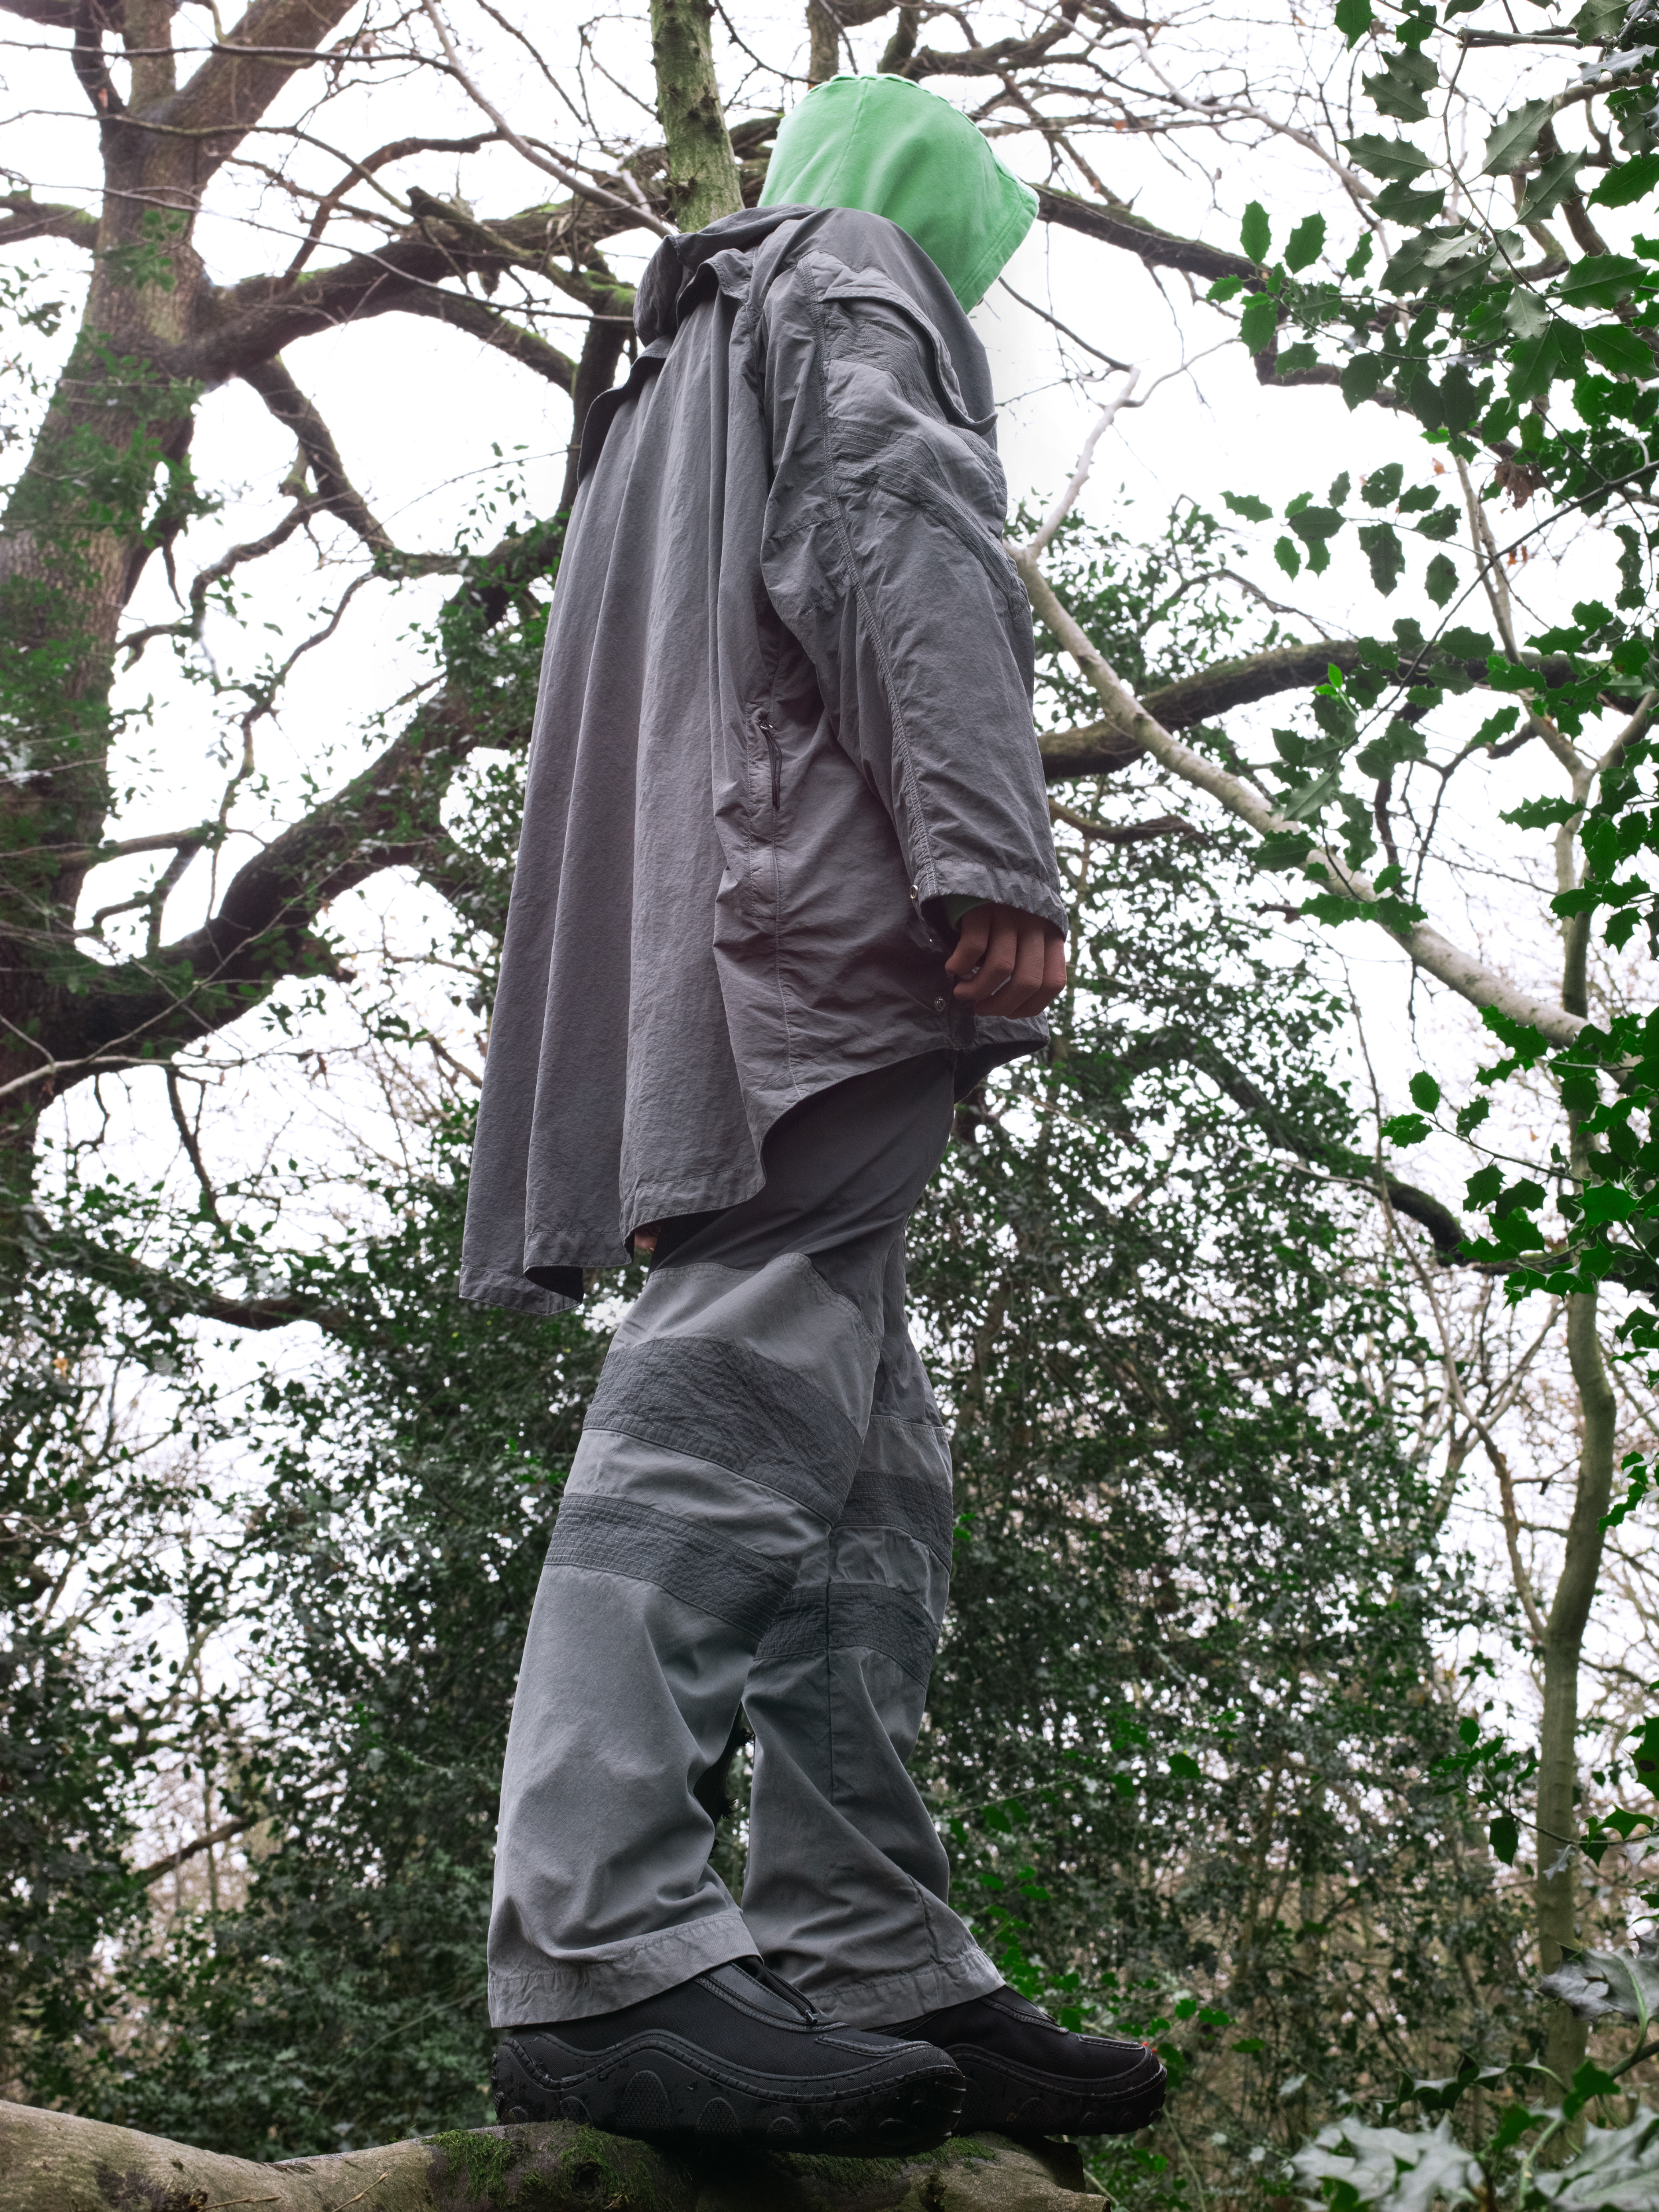 Person in outdoor clothing stands on a tree trunk, face obscured by a hood, amidst greenery